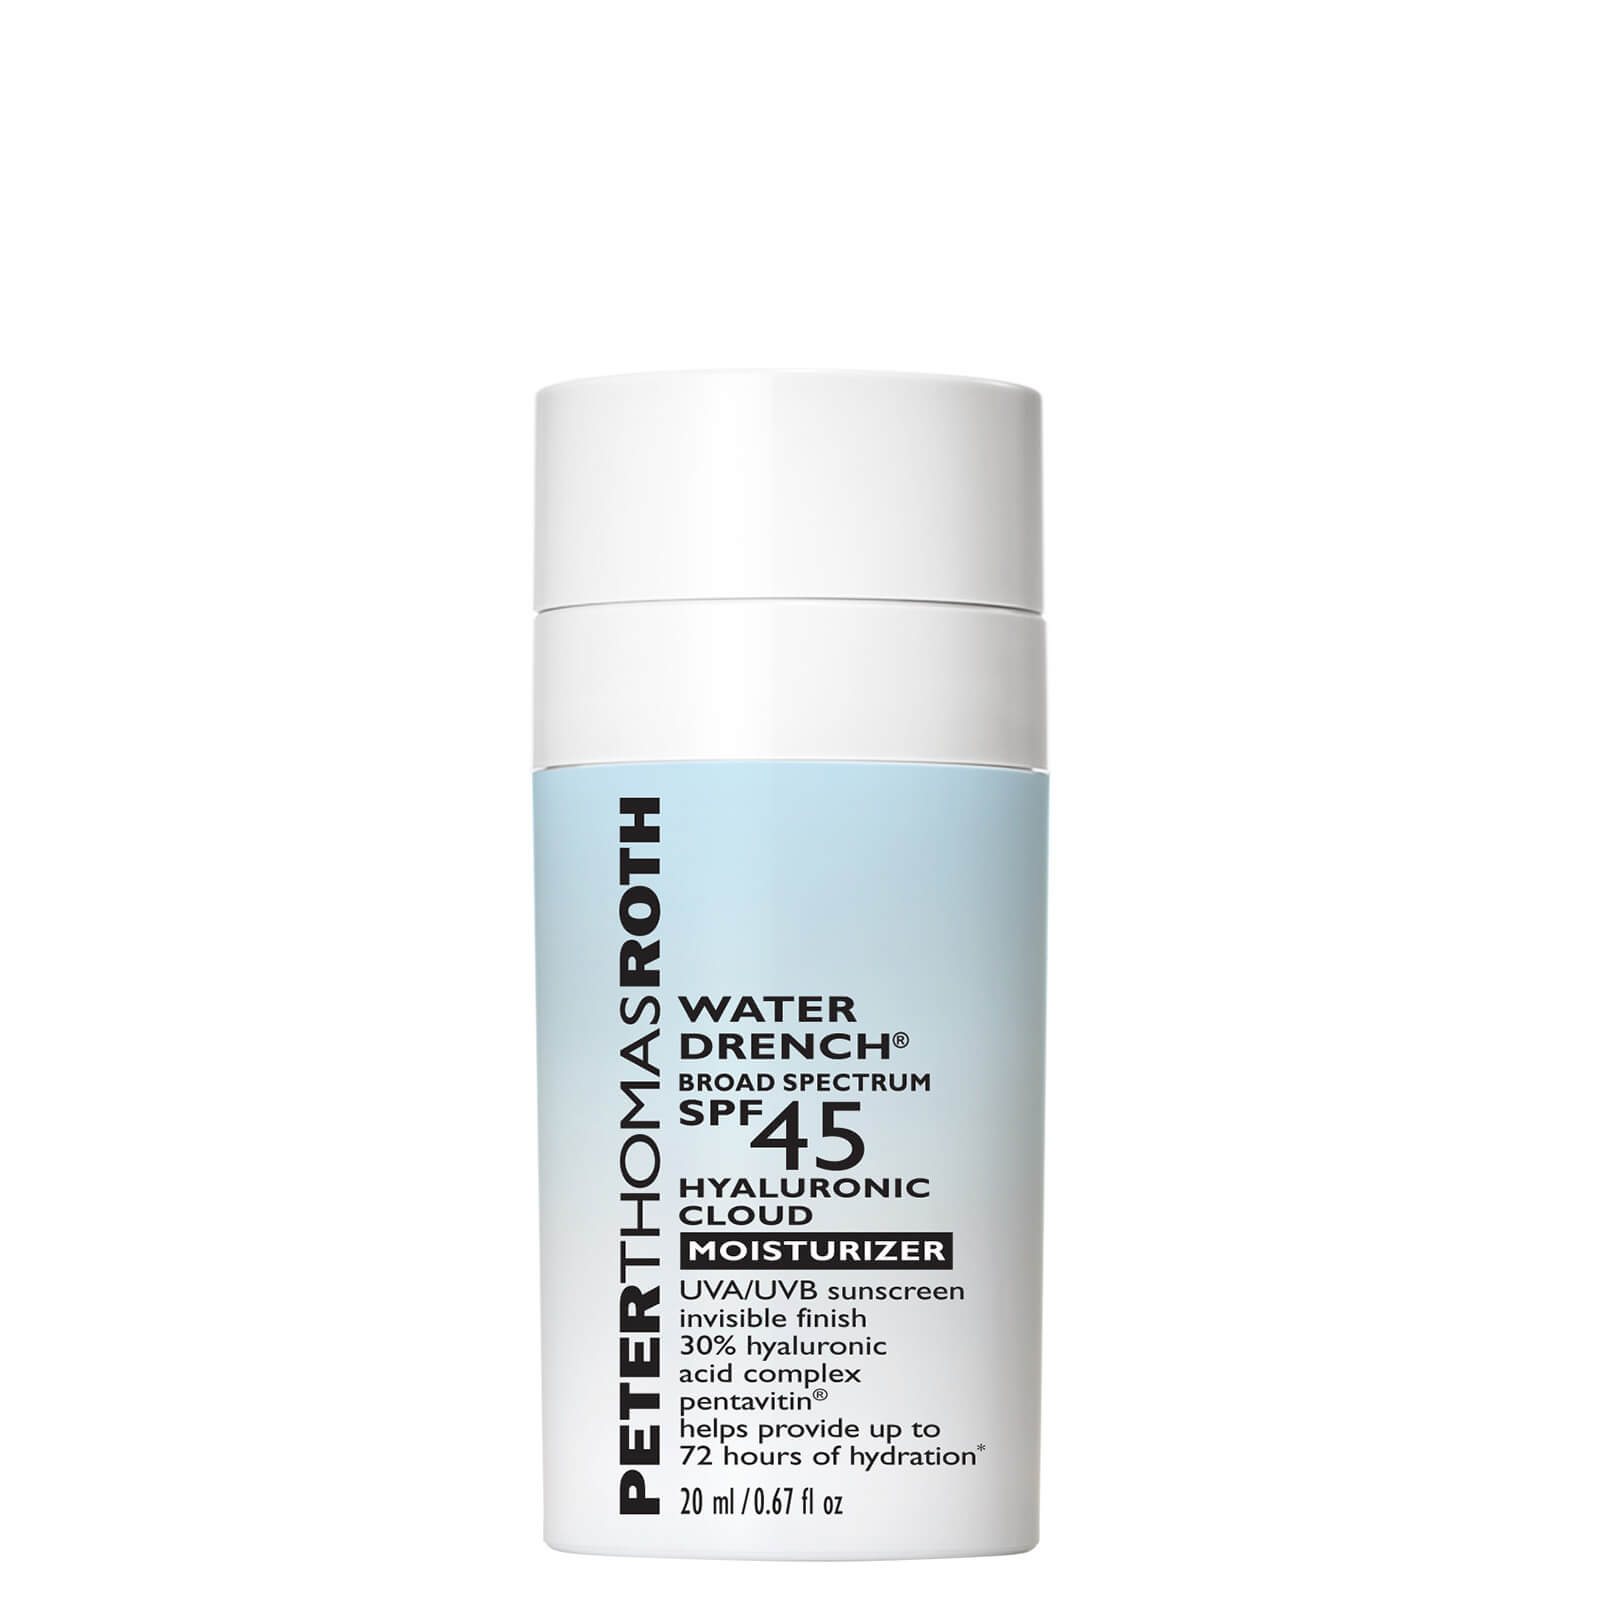 Shop Peter Thomas Roth Water Drench Hyaluronic Cloud Moisturizer Travel Size Spf45 20ml